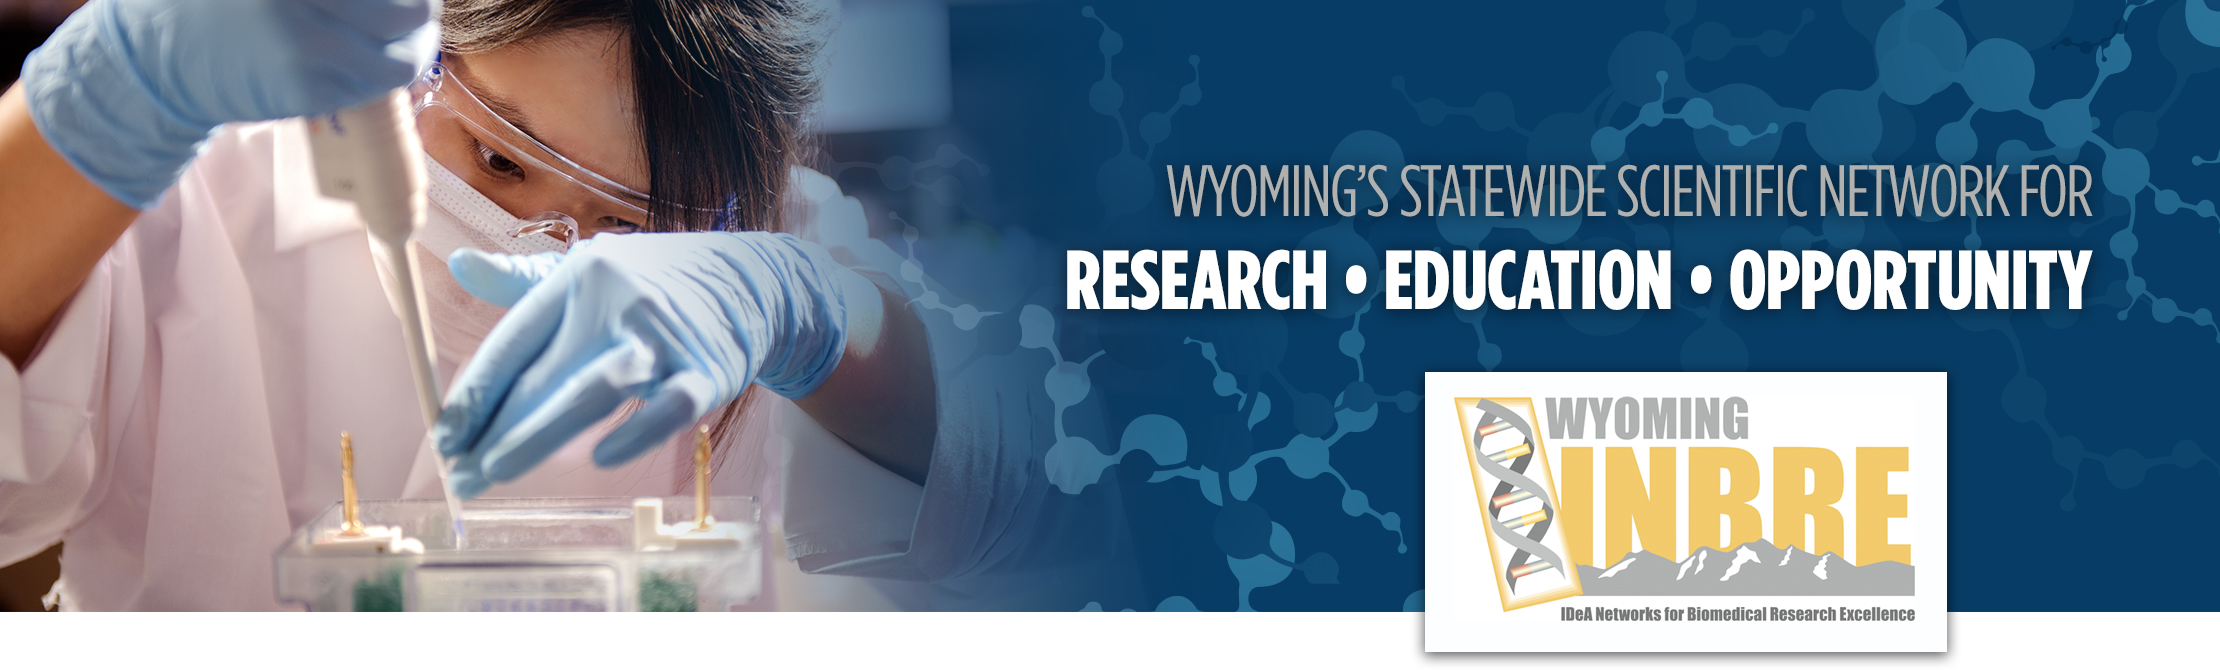 INBRE logo over woman researcher and header: "Wyoming's Statewide Scientific Network for Research, Education, Opportunity"